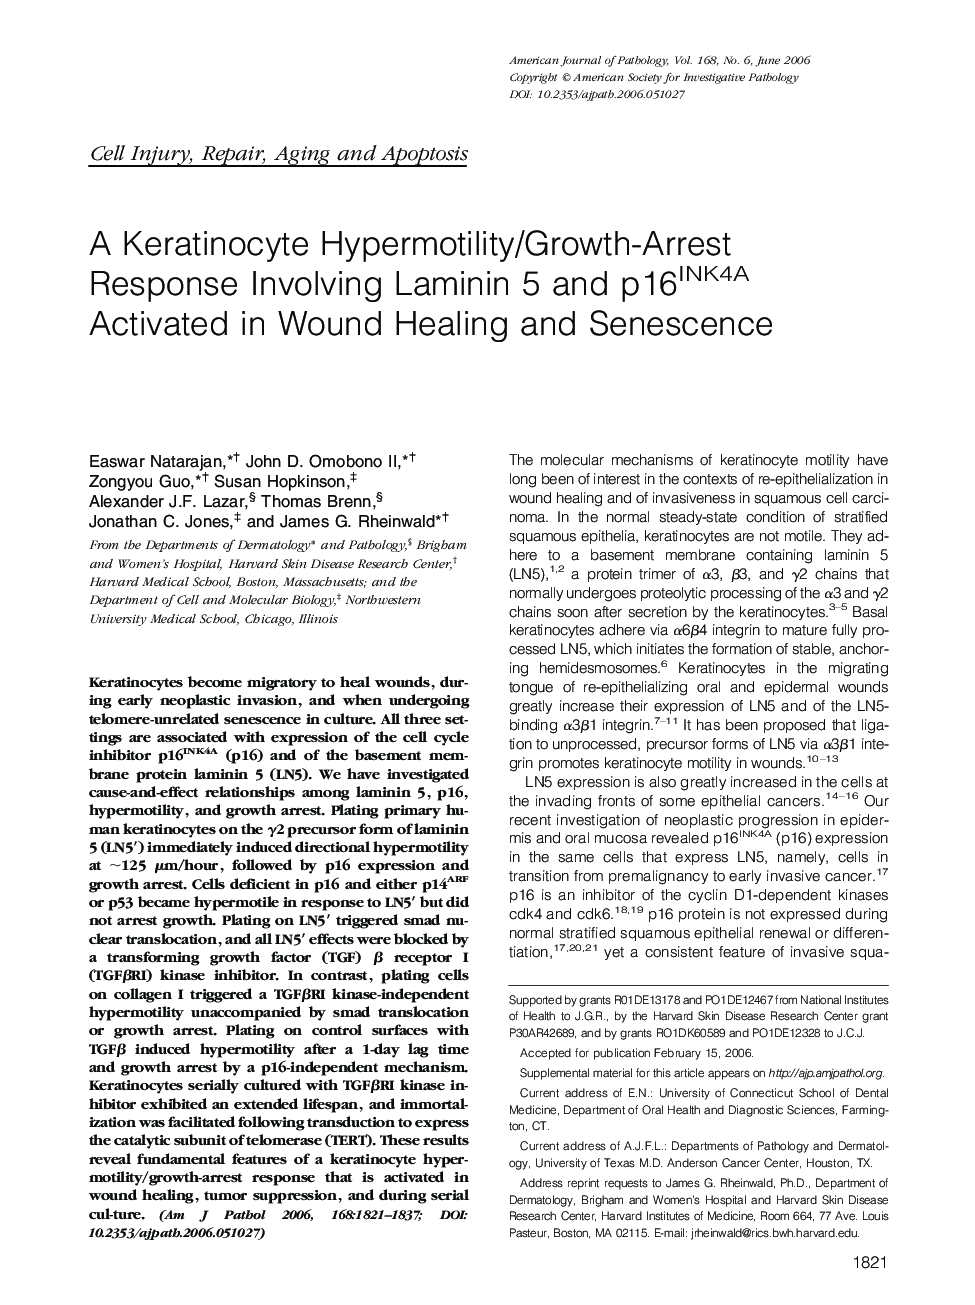 A Keratinocyte Hypermotility/Growth-Arrest Response Involving Laminin 5 and p16INK4A Activated in Wound Healing and Senescence 